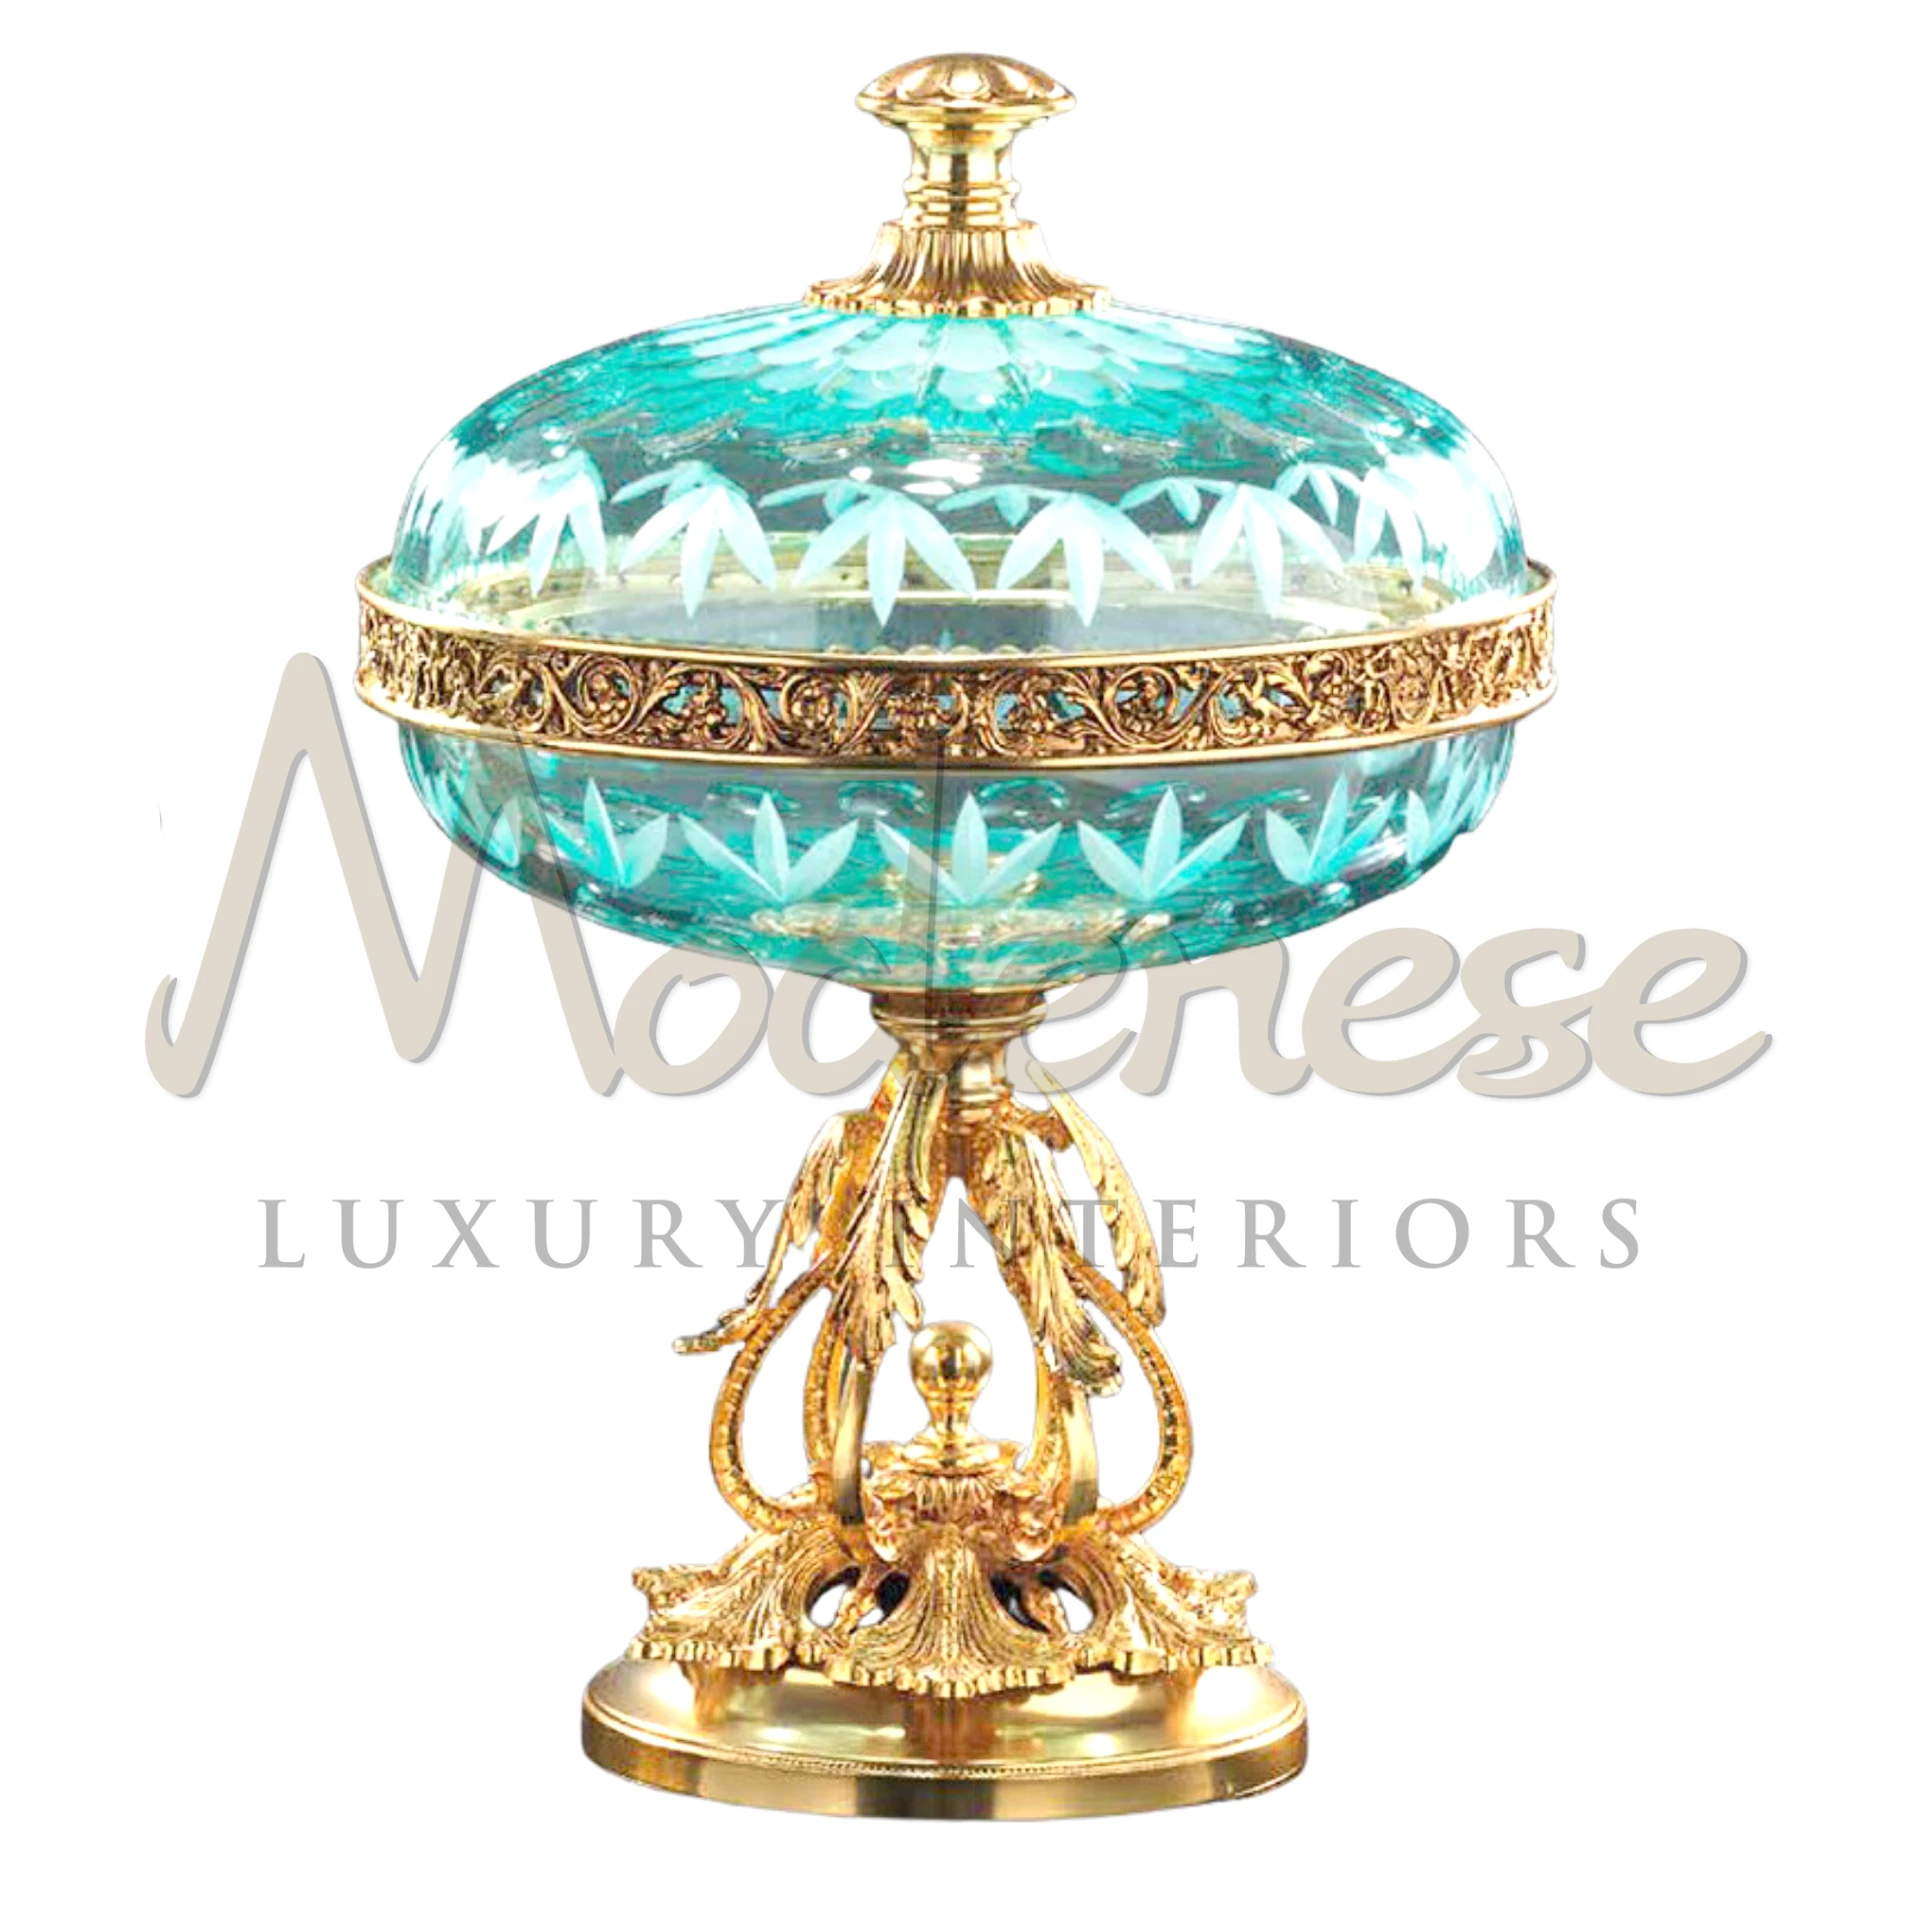 Classical Turquoise Box, perfect for luxury interior enthusiasts, offering a blend of classic and baroque elegance for storing treasures.





